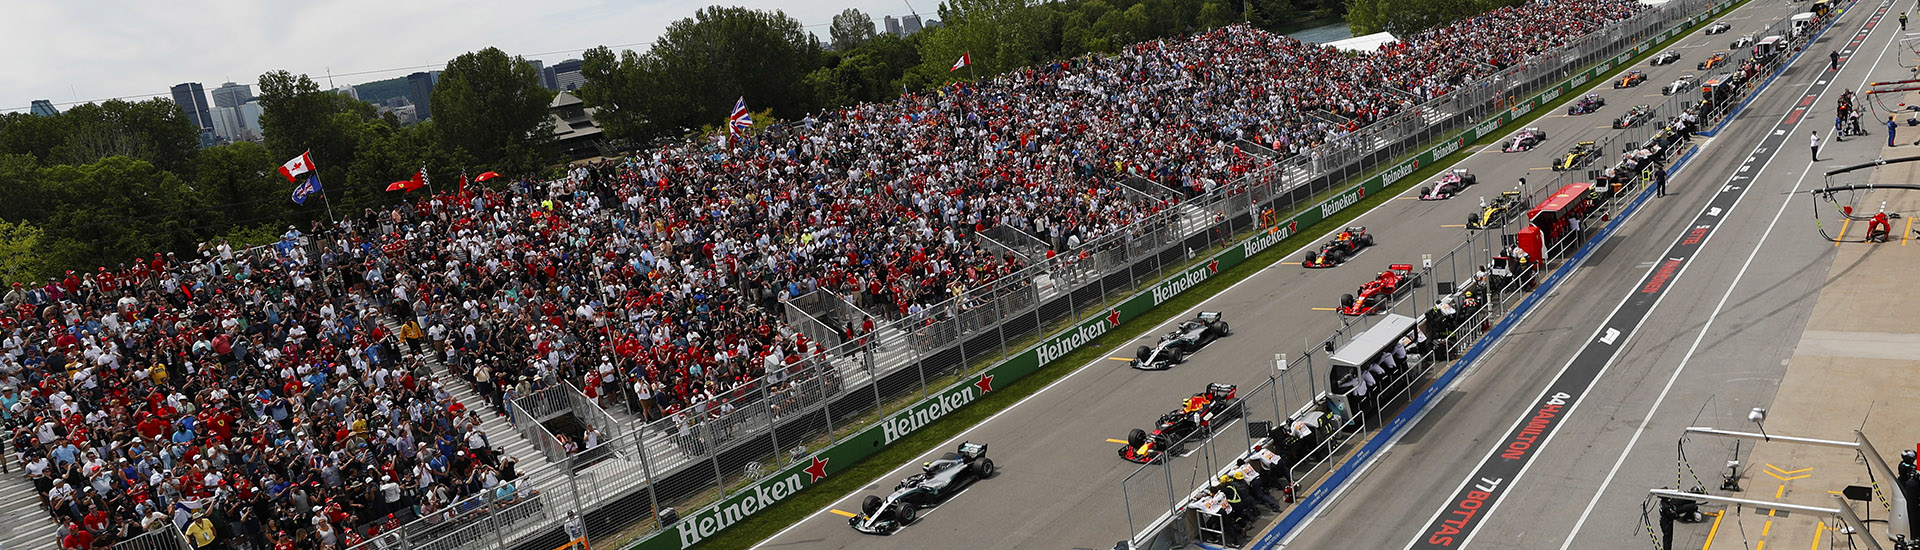 Best seats at the Brazil F1 Grand Prix - All grandstands reviewed